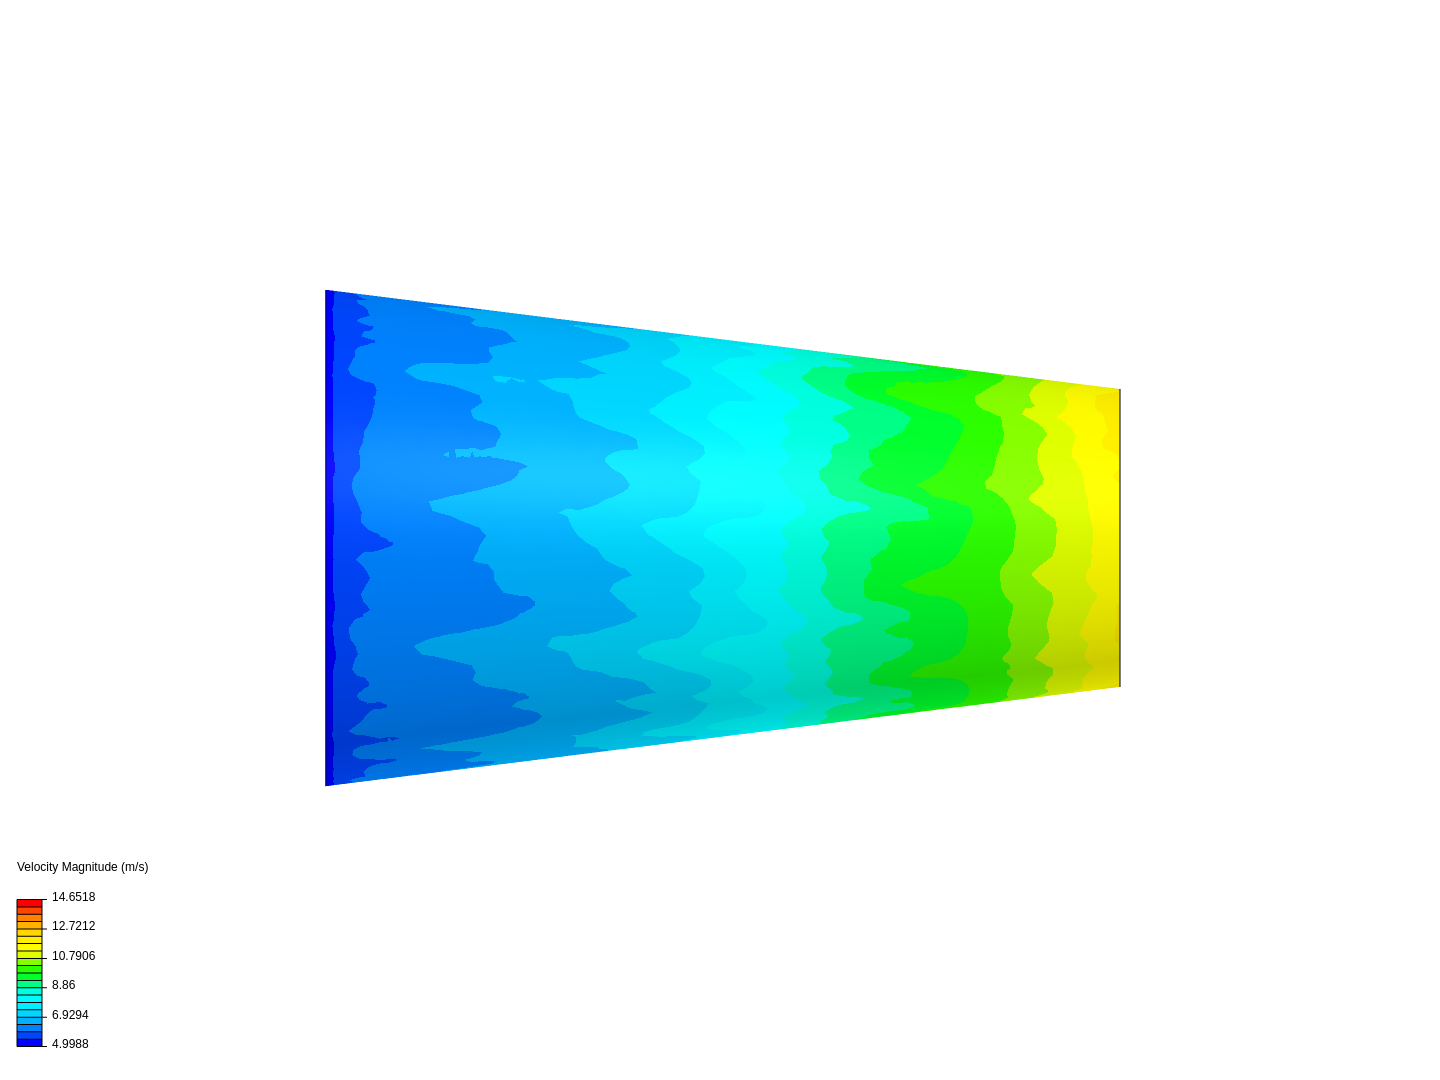 Flow in a Nozzle image